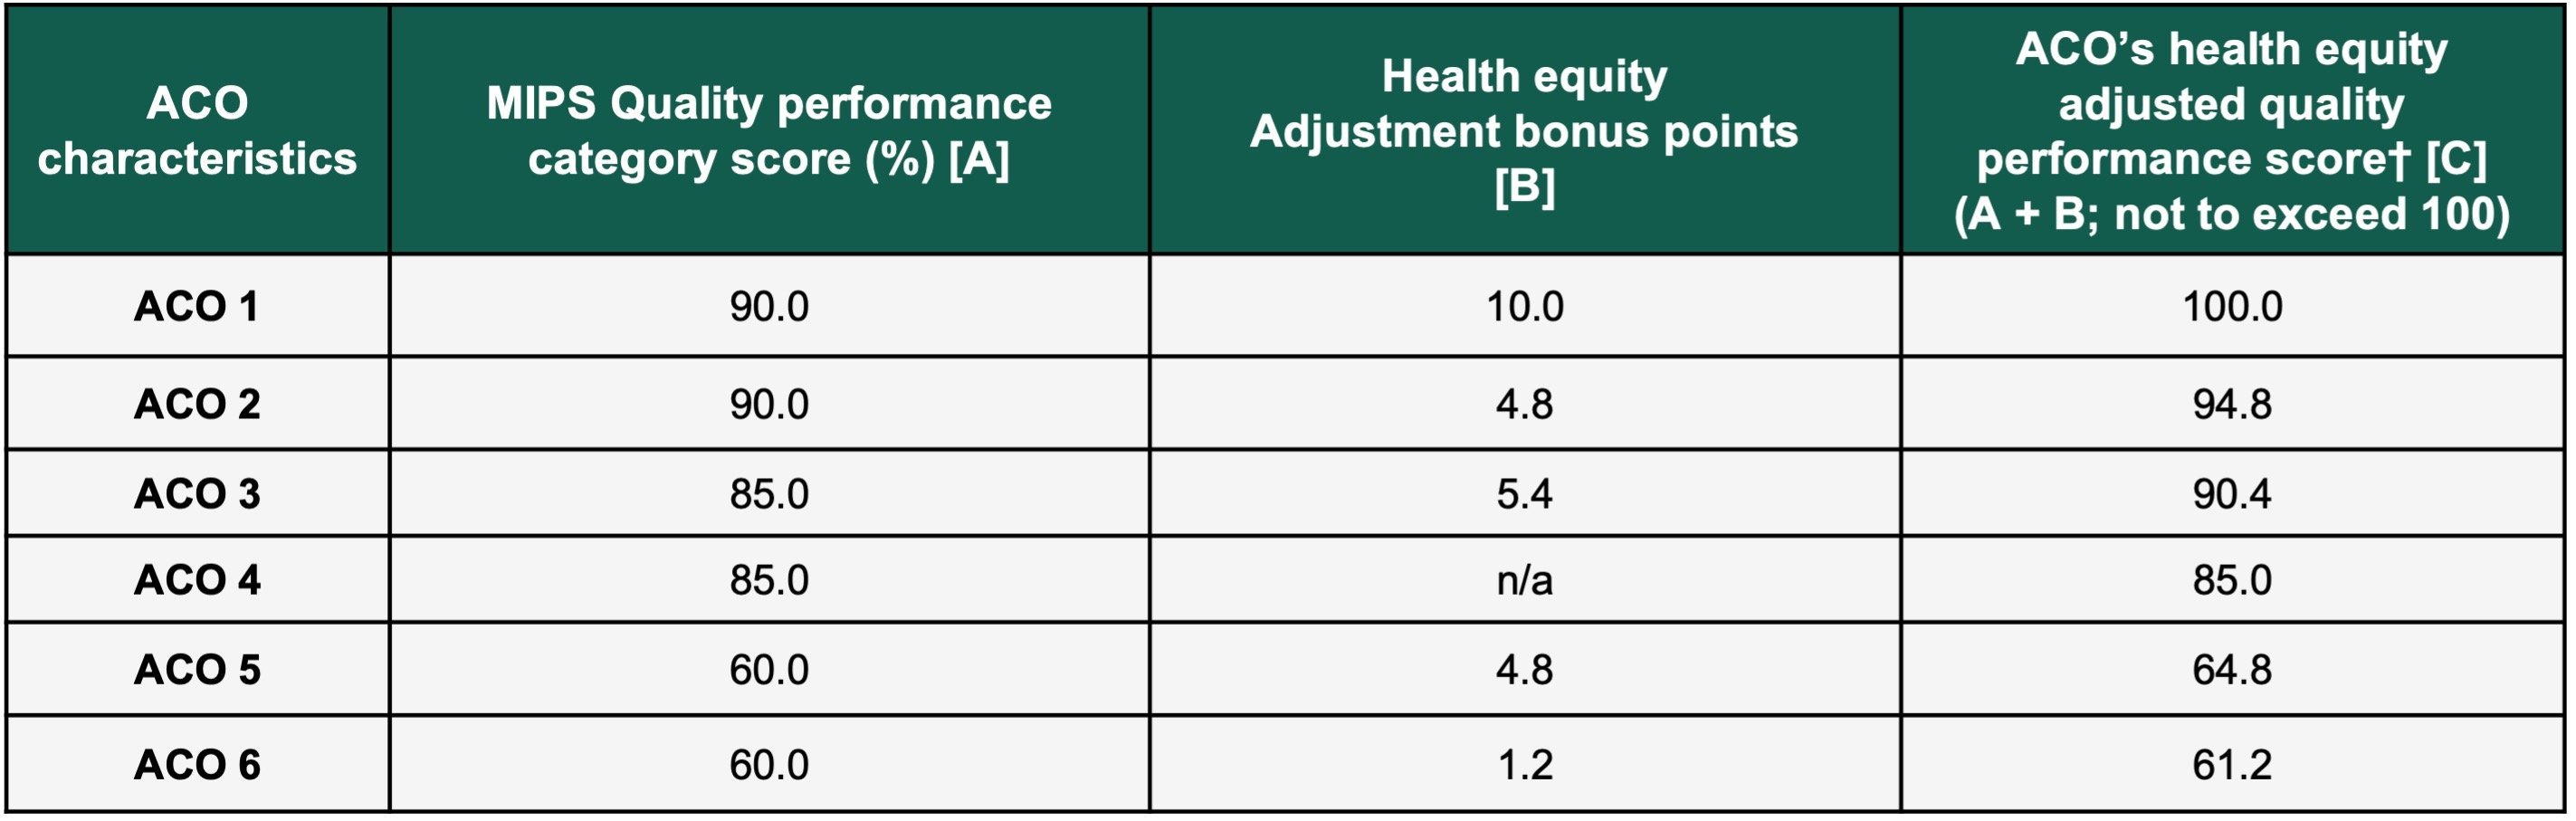 Health equity adjusted performance chart